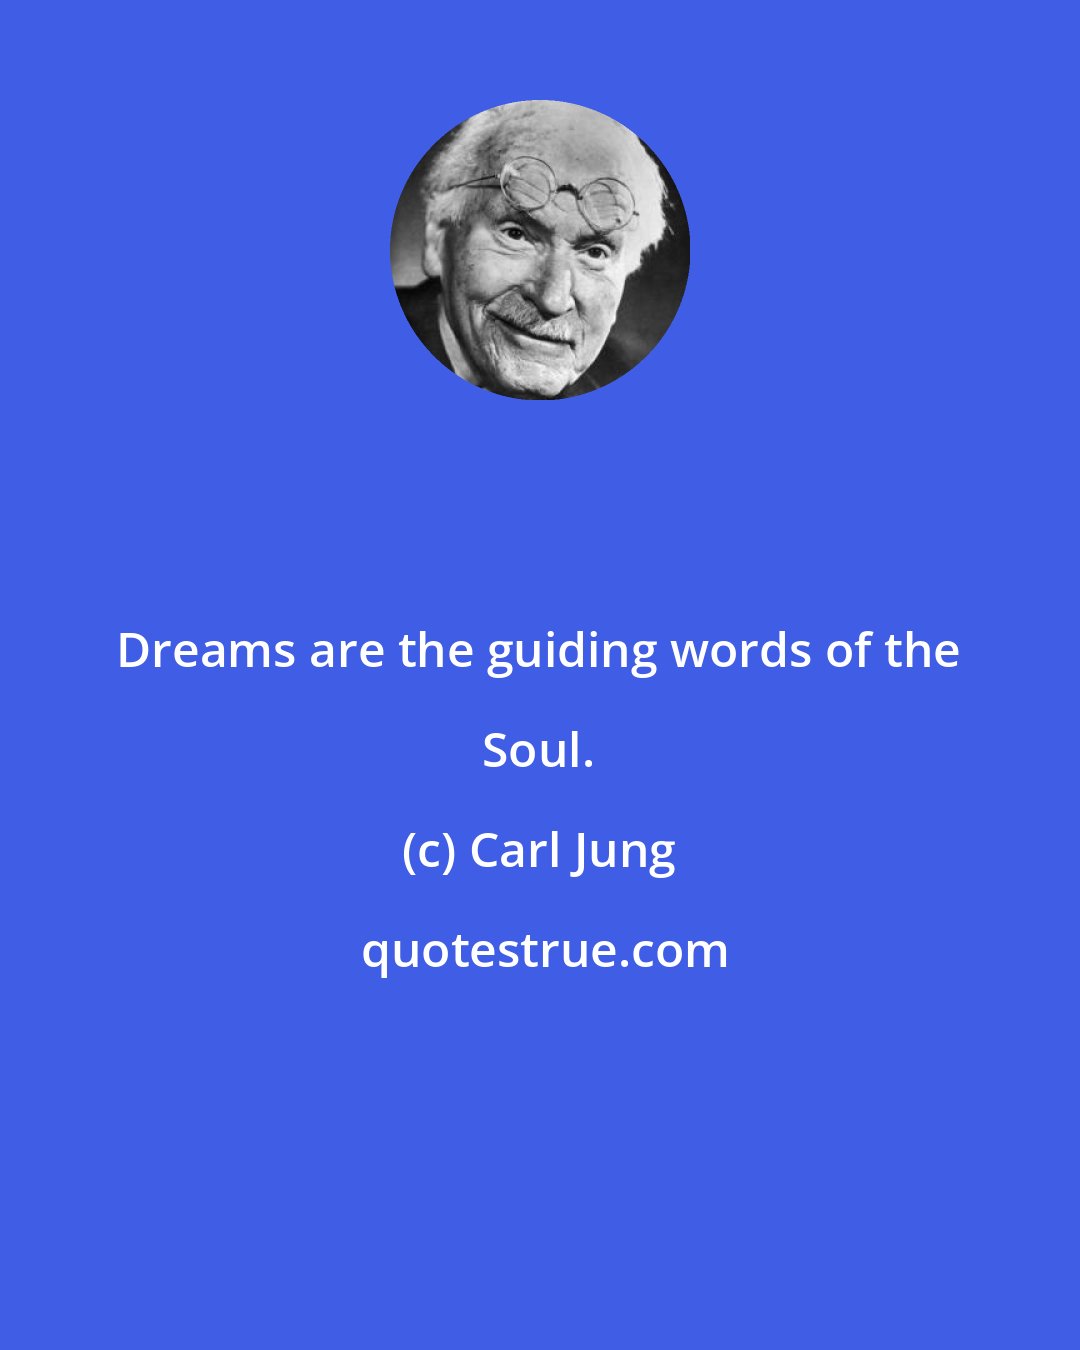 Carl Jung: Dreams are the guiding words of the Soul.